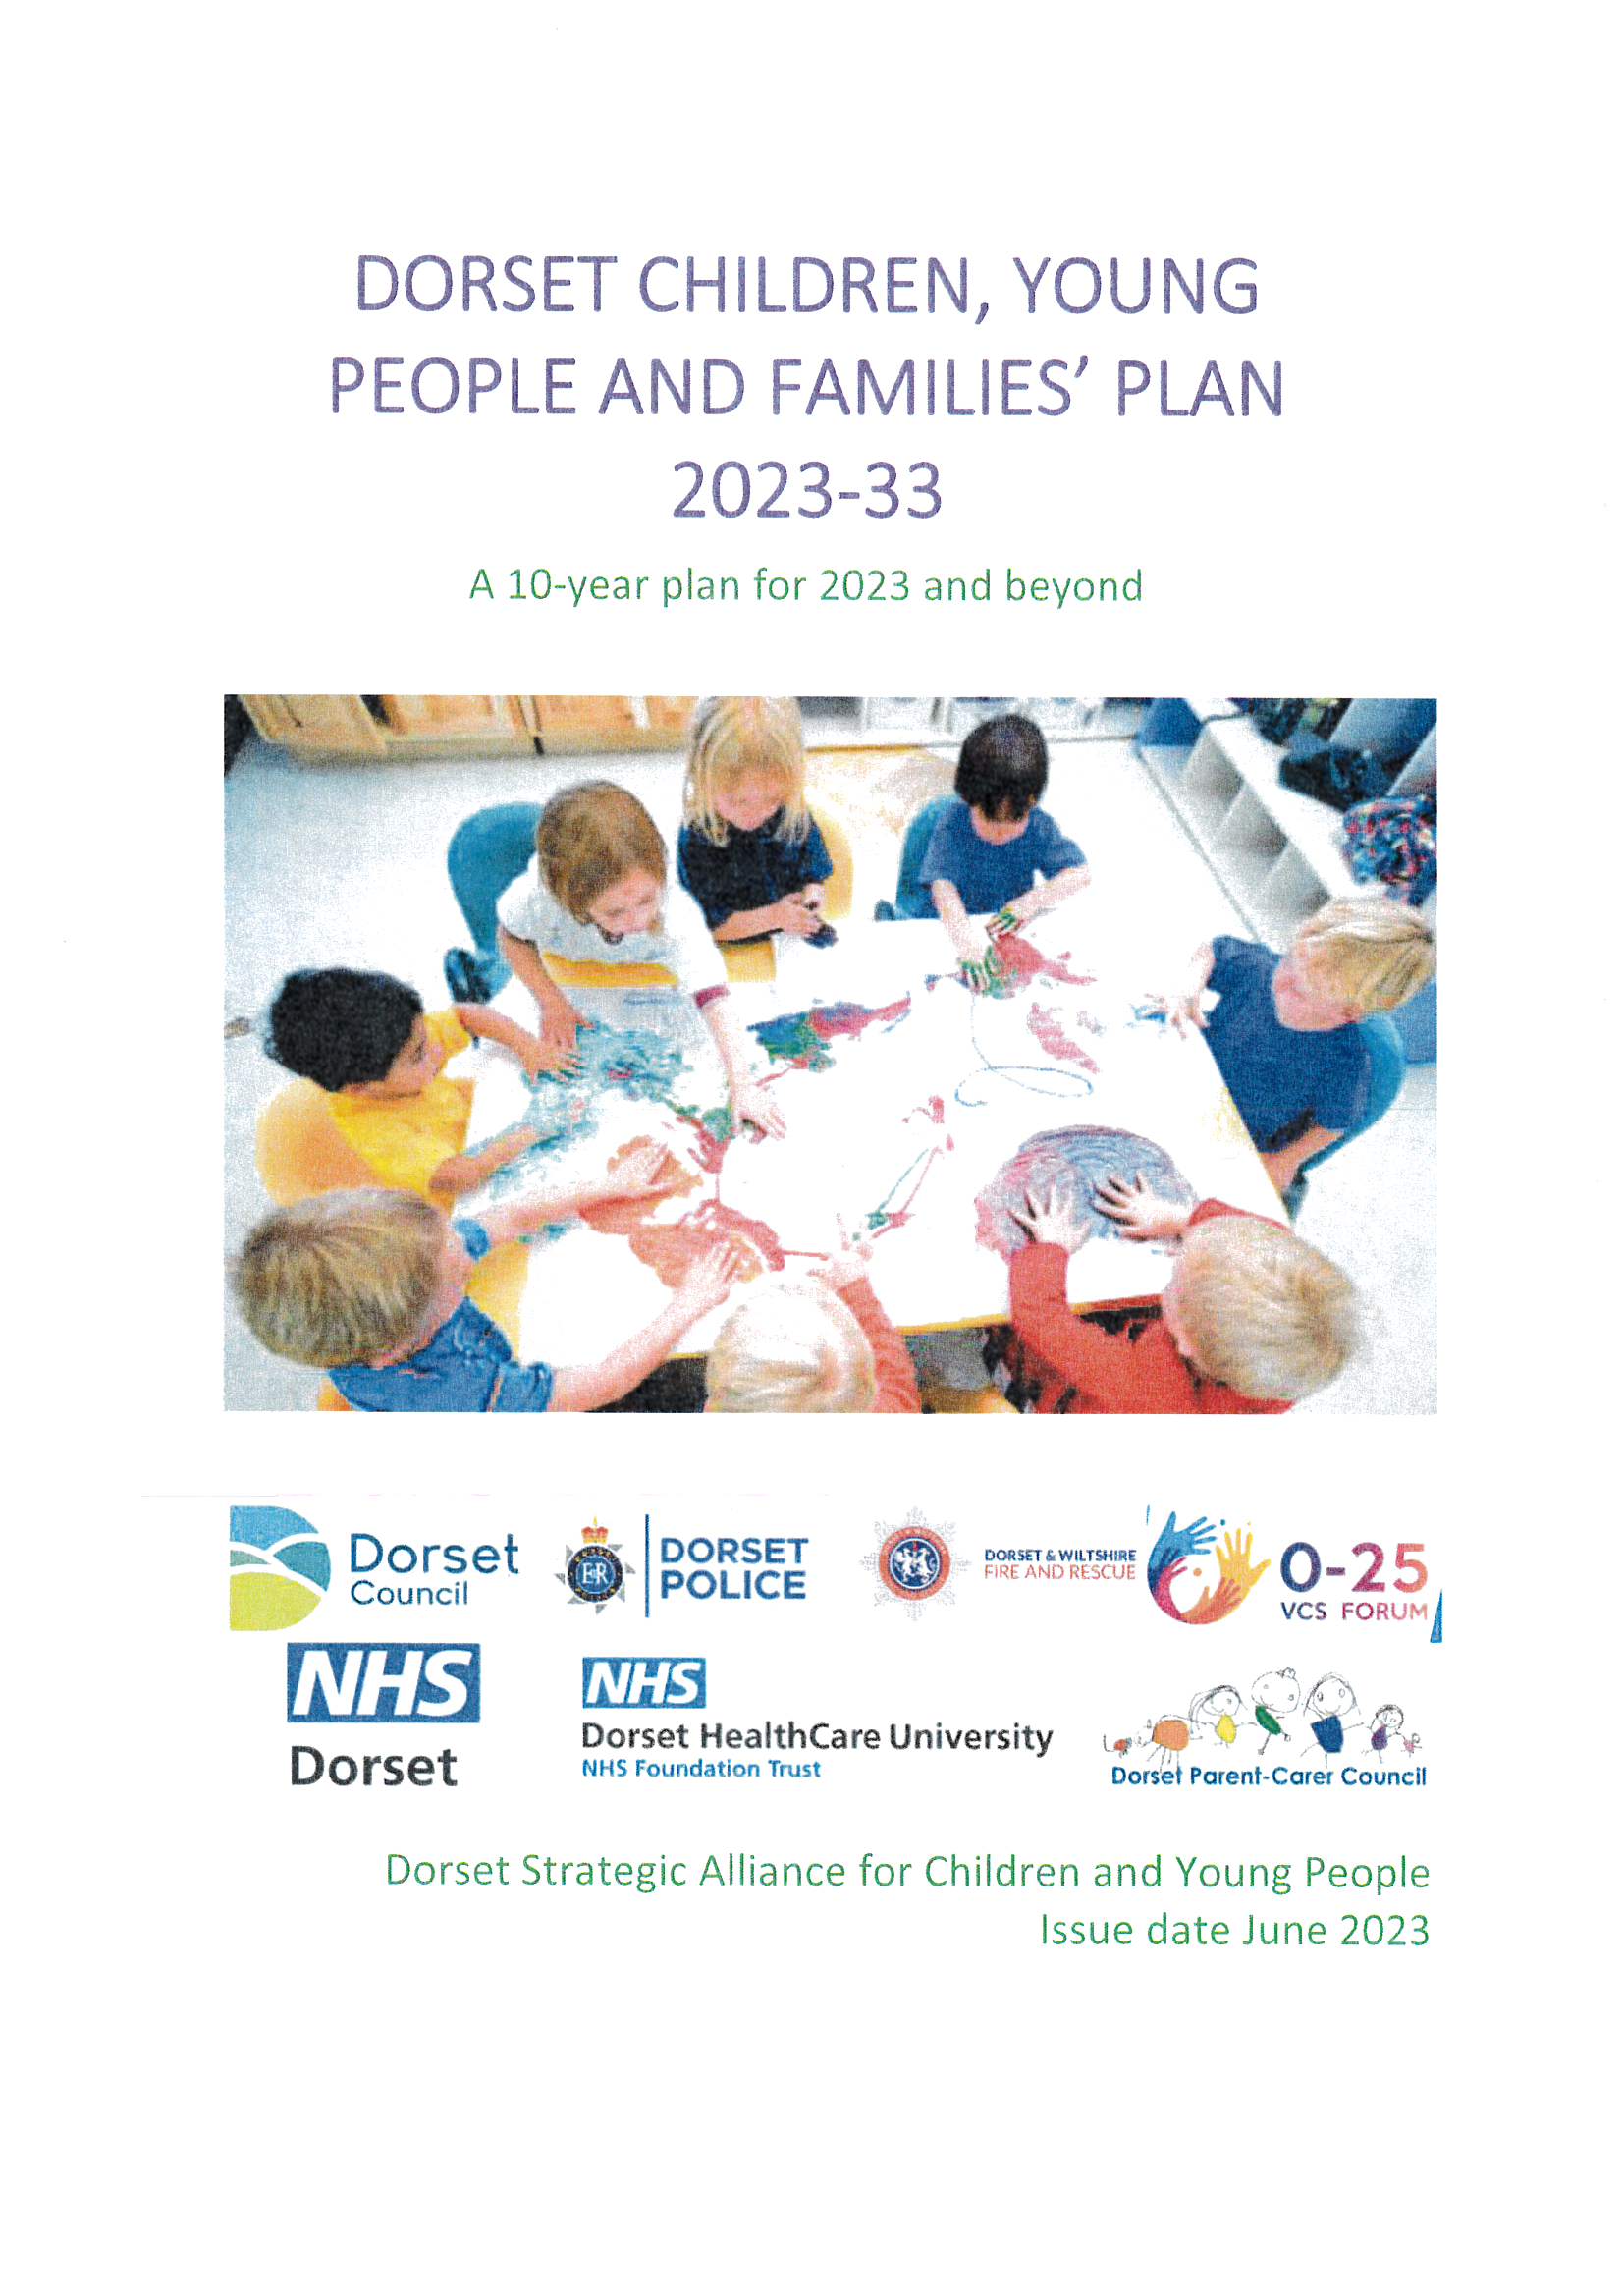 Dorset Child, Young People and Families Plan 2023-2033